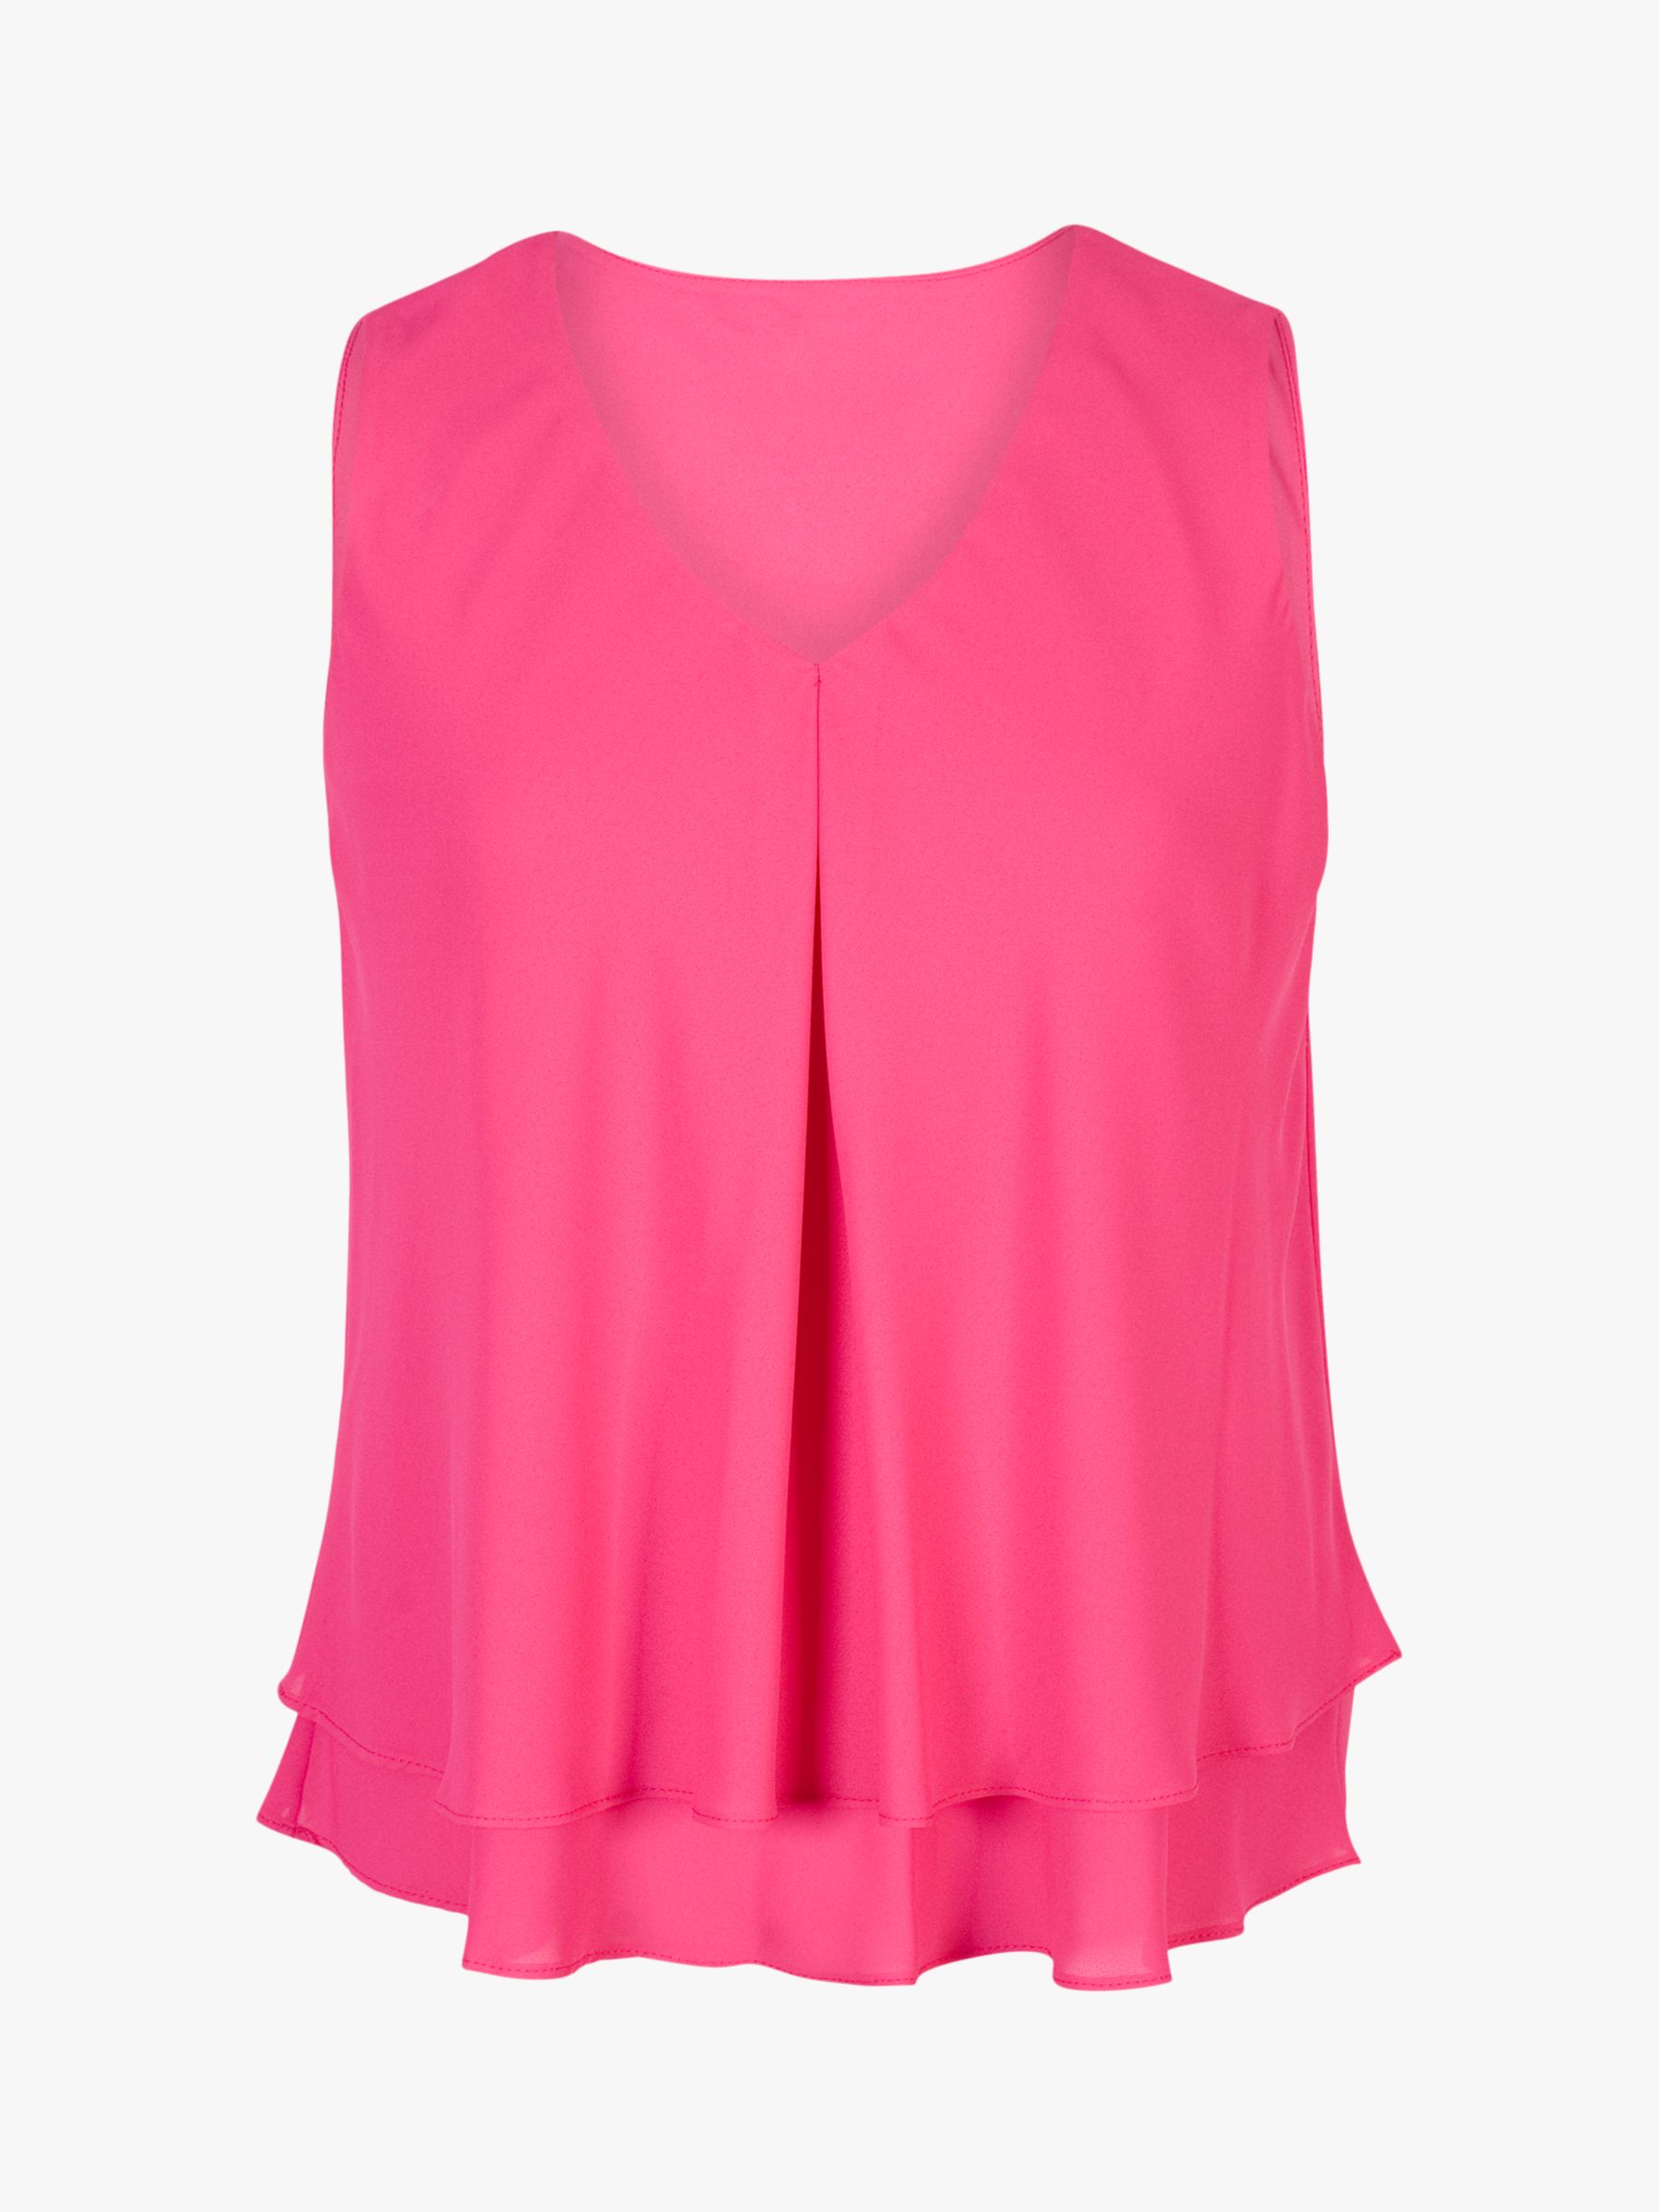 Chesca Layer Top, Hot Pink at John Lewis & Partners